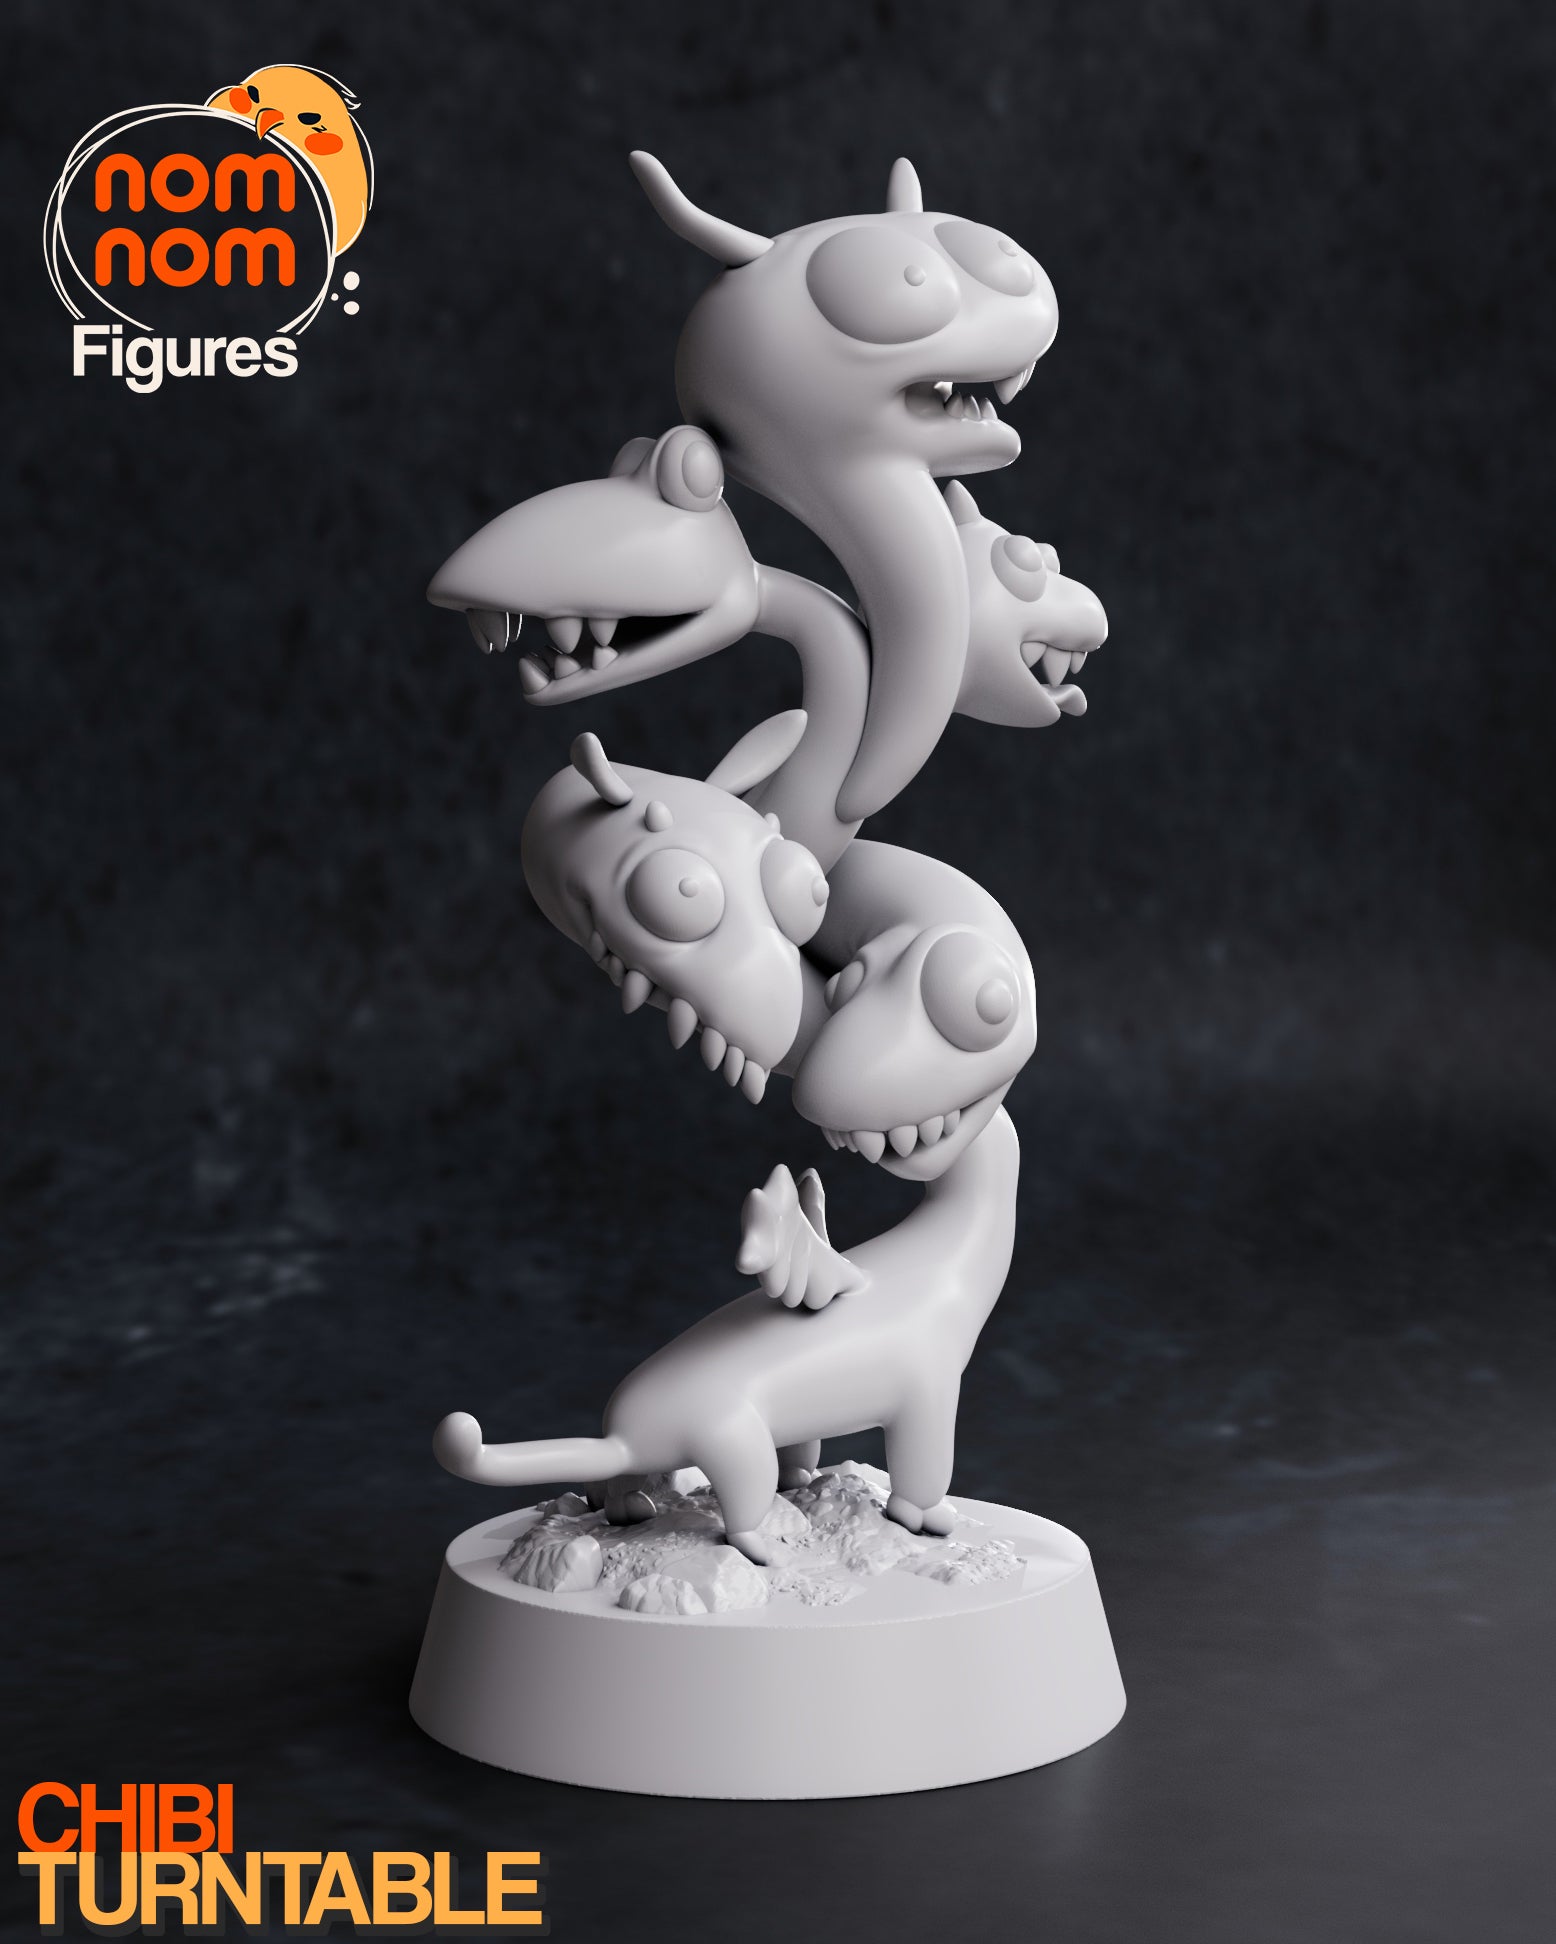 Silly Queen Mother of Dragons | Resin Garage Kit Sculpture Anime Video Game Fan Art Statue | Nomnom Figures - Tattles Told 3D